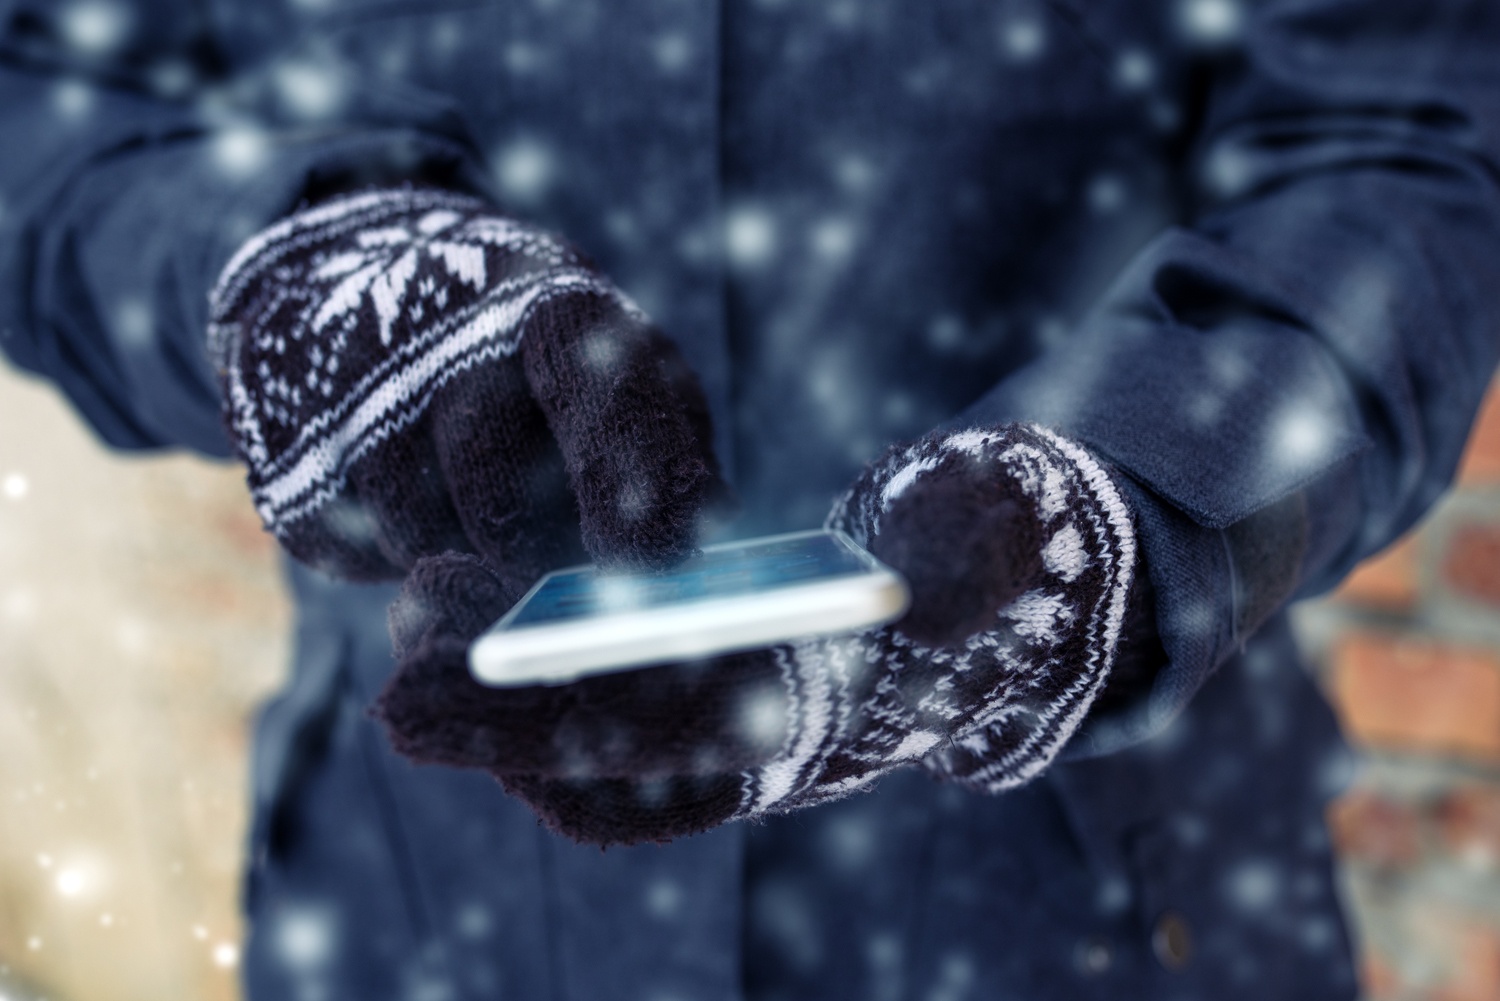 Tips for protecting your electronics from the winter cold